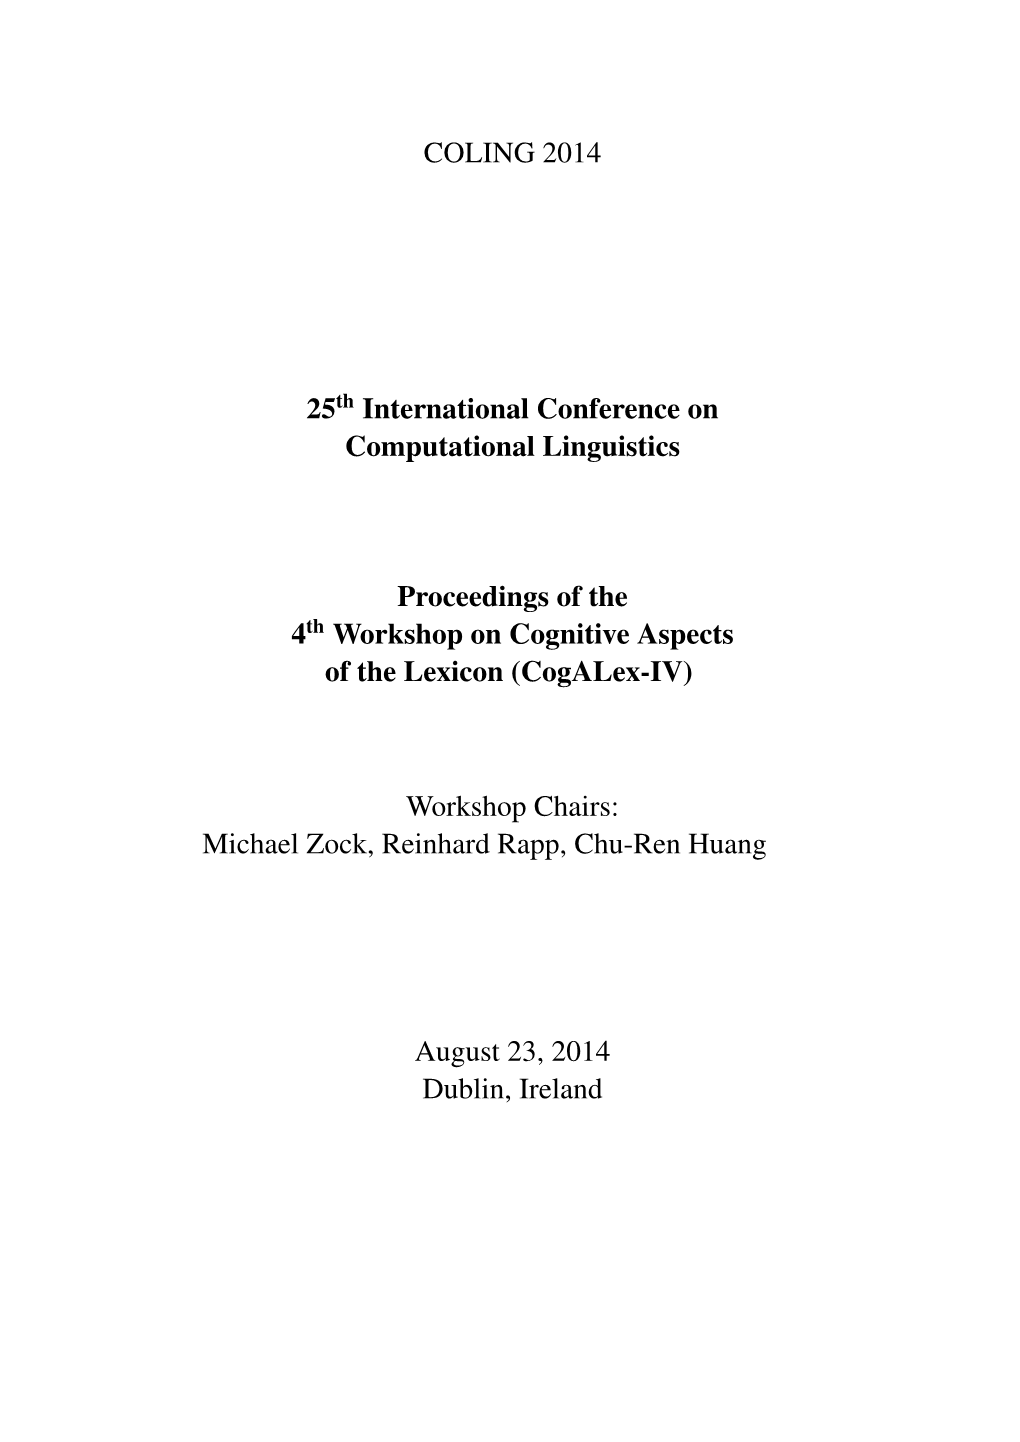 Proceedings of the 25Th International Conference on Computational